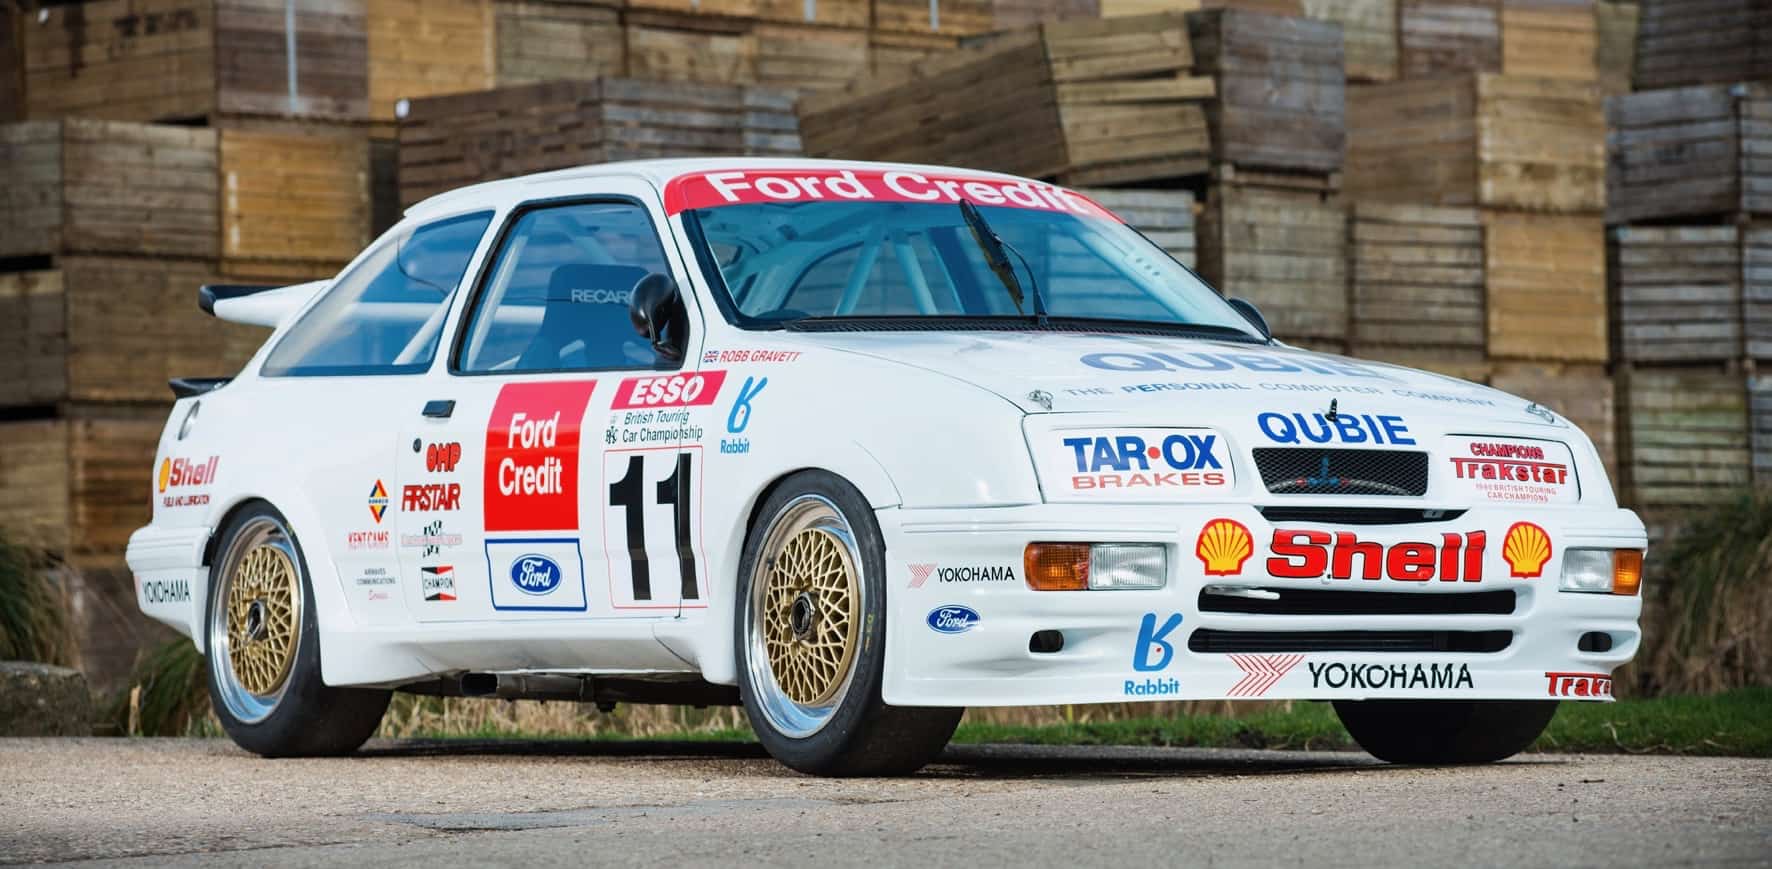 Star power boosts Silverstone Auction sale | ClassicCars.com Journal